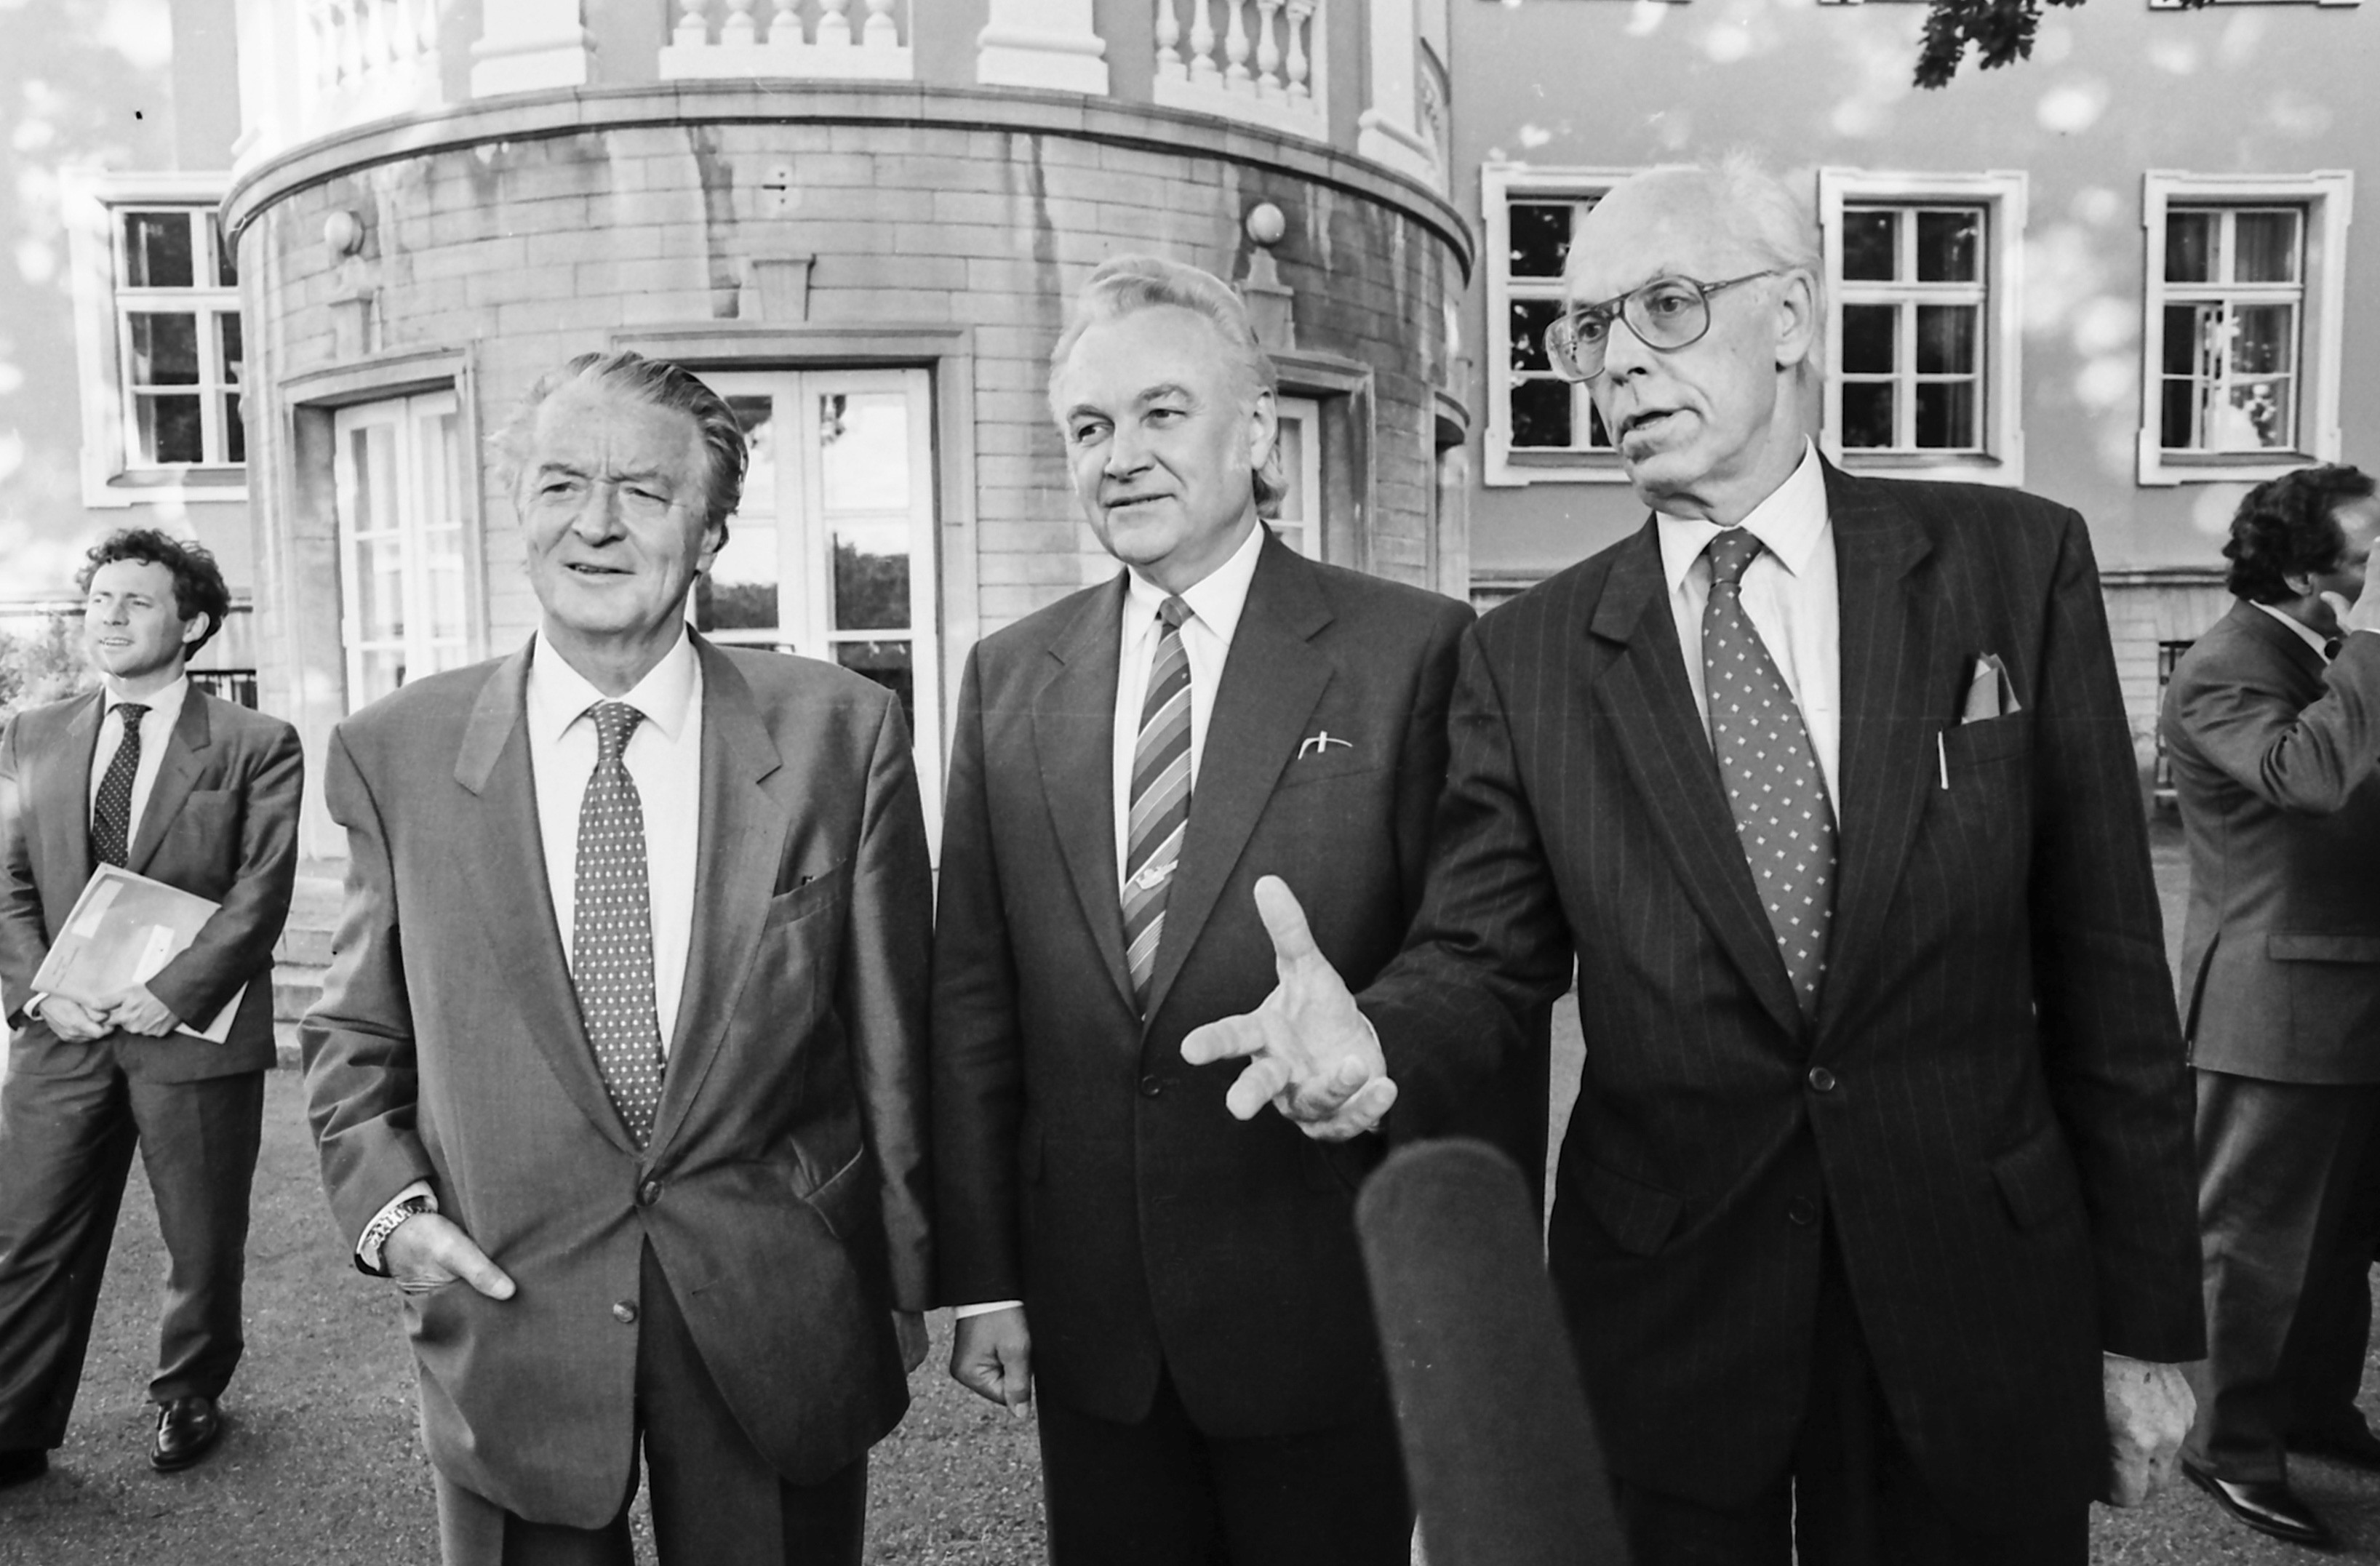 France was the first major Western power to recognise Estonian, Latvian and Lithuanian independence. Just five days after recognition, French foreign minister Roland Dumas paid a visit to Estonia and was received in Kadriorg by the chairman of the Supreme Council, Arnold Rüütel, and foreign minister Lennart Meri. Photo by Peeter Langovits, from the archive of the foreign ministry.